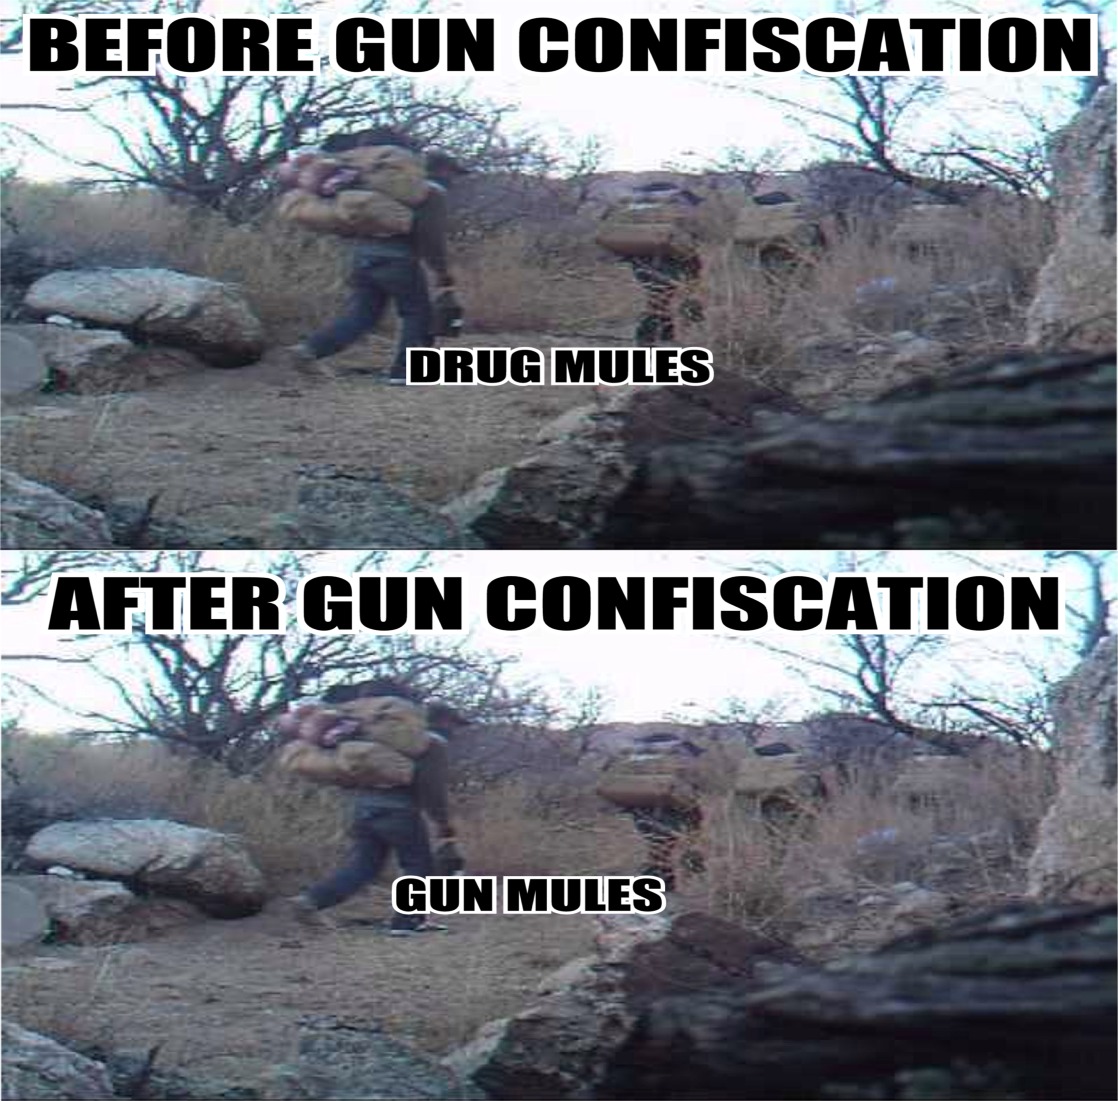 animal - Before Gun Confiscation Drug Mules After Gun Confiscation After Gun Mules